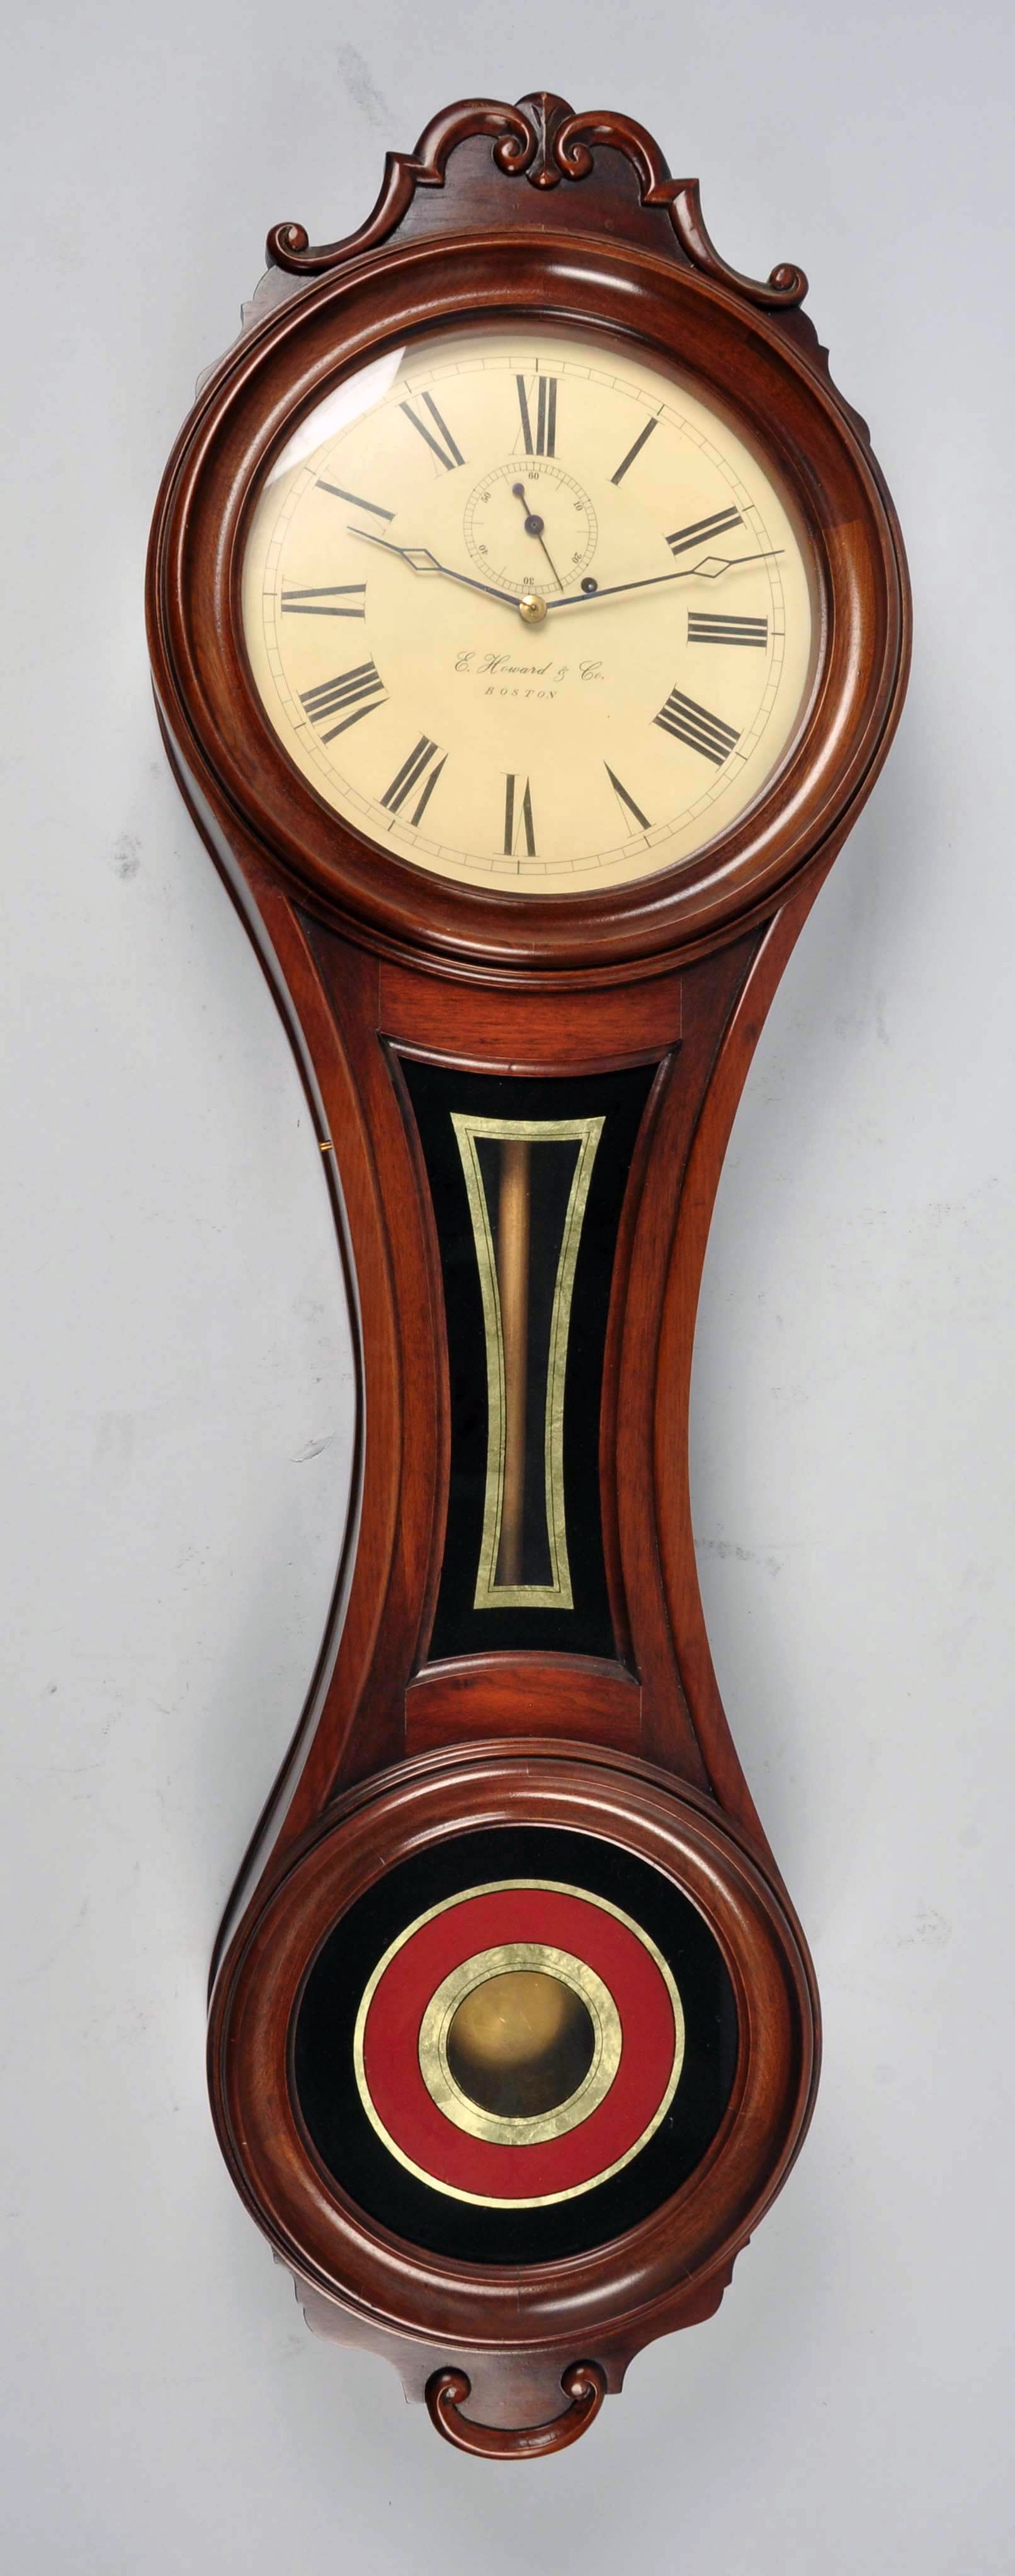 Howard & Co. of Boston wall clock, walnut case, 59 inches tall. Estimate: $3,000-$5,000. Morphy Auctions image